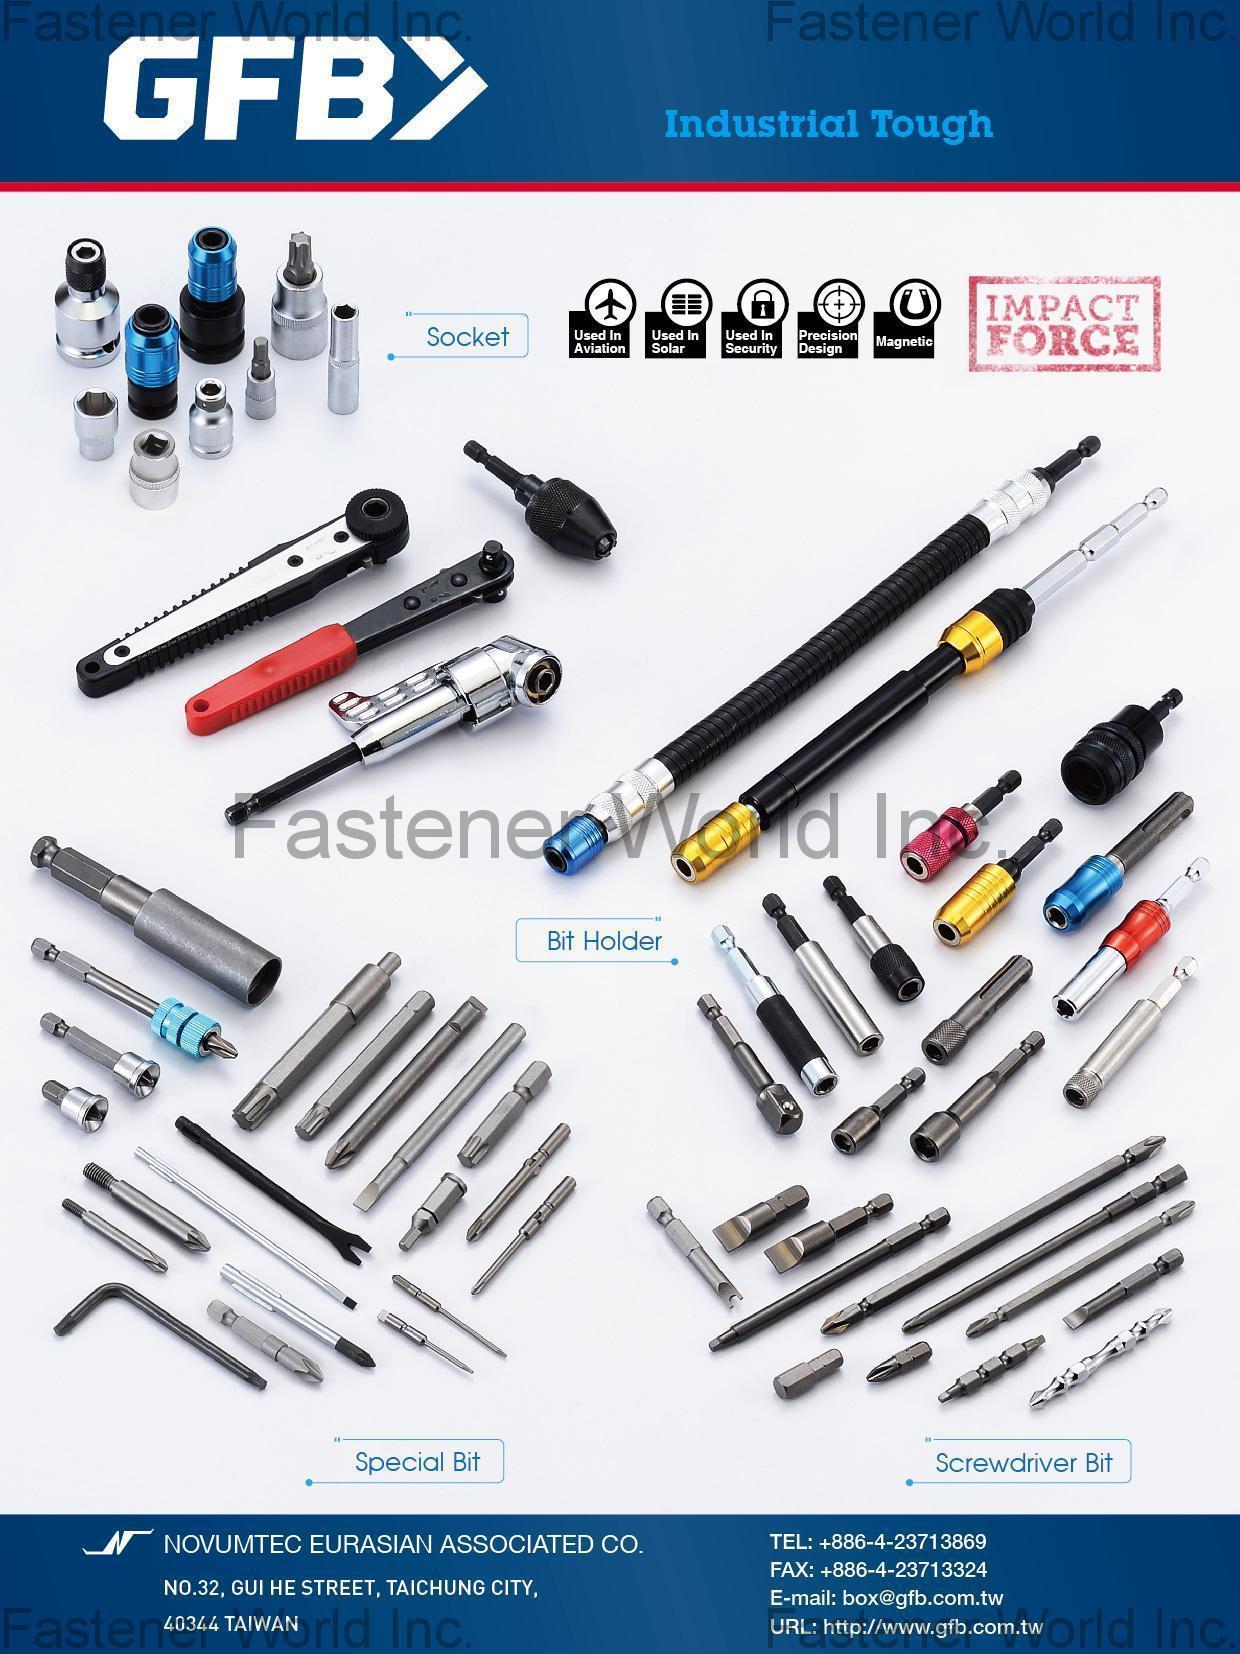 NOVUMTEC EURASIAN ASSOCIATED CO. , Insert Bit Shank, Double Bit, Nutstter & Bit Holder, Screwdriver Bits for all Screws and Bolts, Electric Screw Driver Bit, Magnetic Bit Holder, Socket Adaptor, Socket Extension, Nut Setter Magnet and Non-Magnet, Power Tool Accessories, Normal and Special Drivers + Chisel, Drill Parts and Accessories, Grinding Polish and Brush, Impact Socket, Adaptor, Extension Barention Bar, Saw Blade, Hole Saw, Brushes, Power Hamer Chisels , Sockets